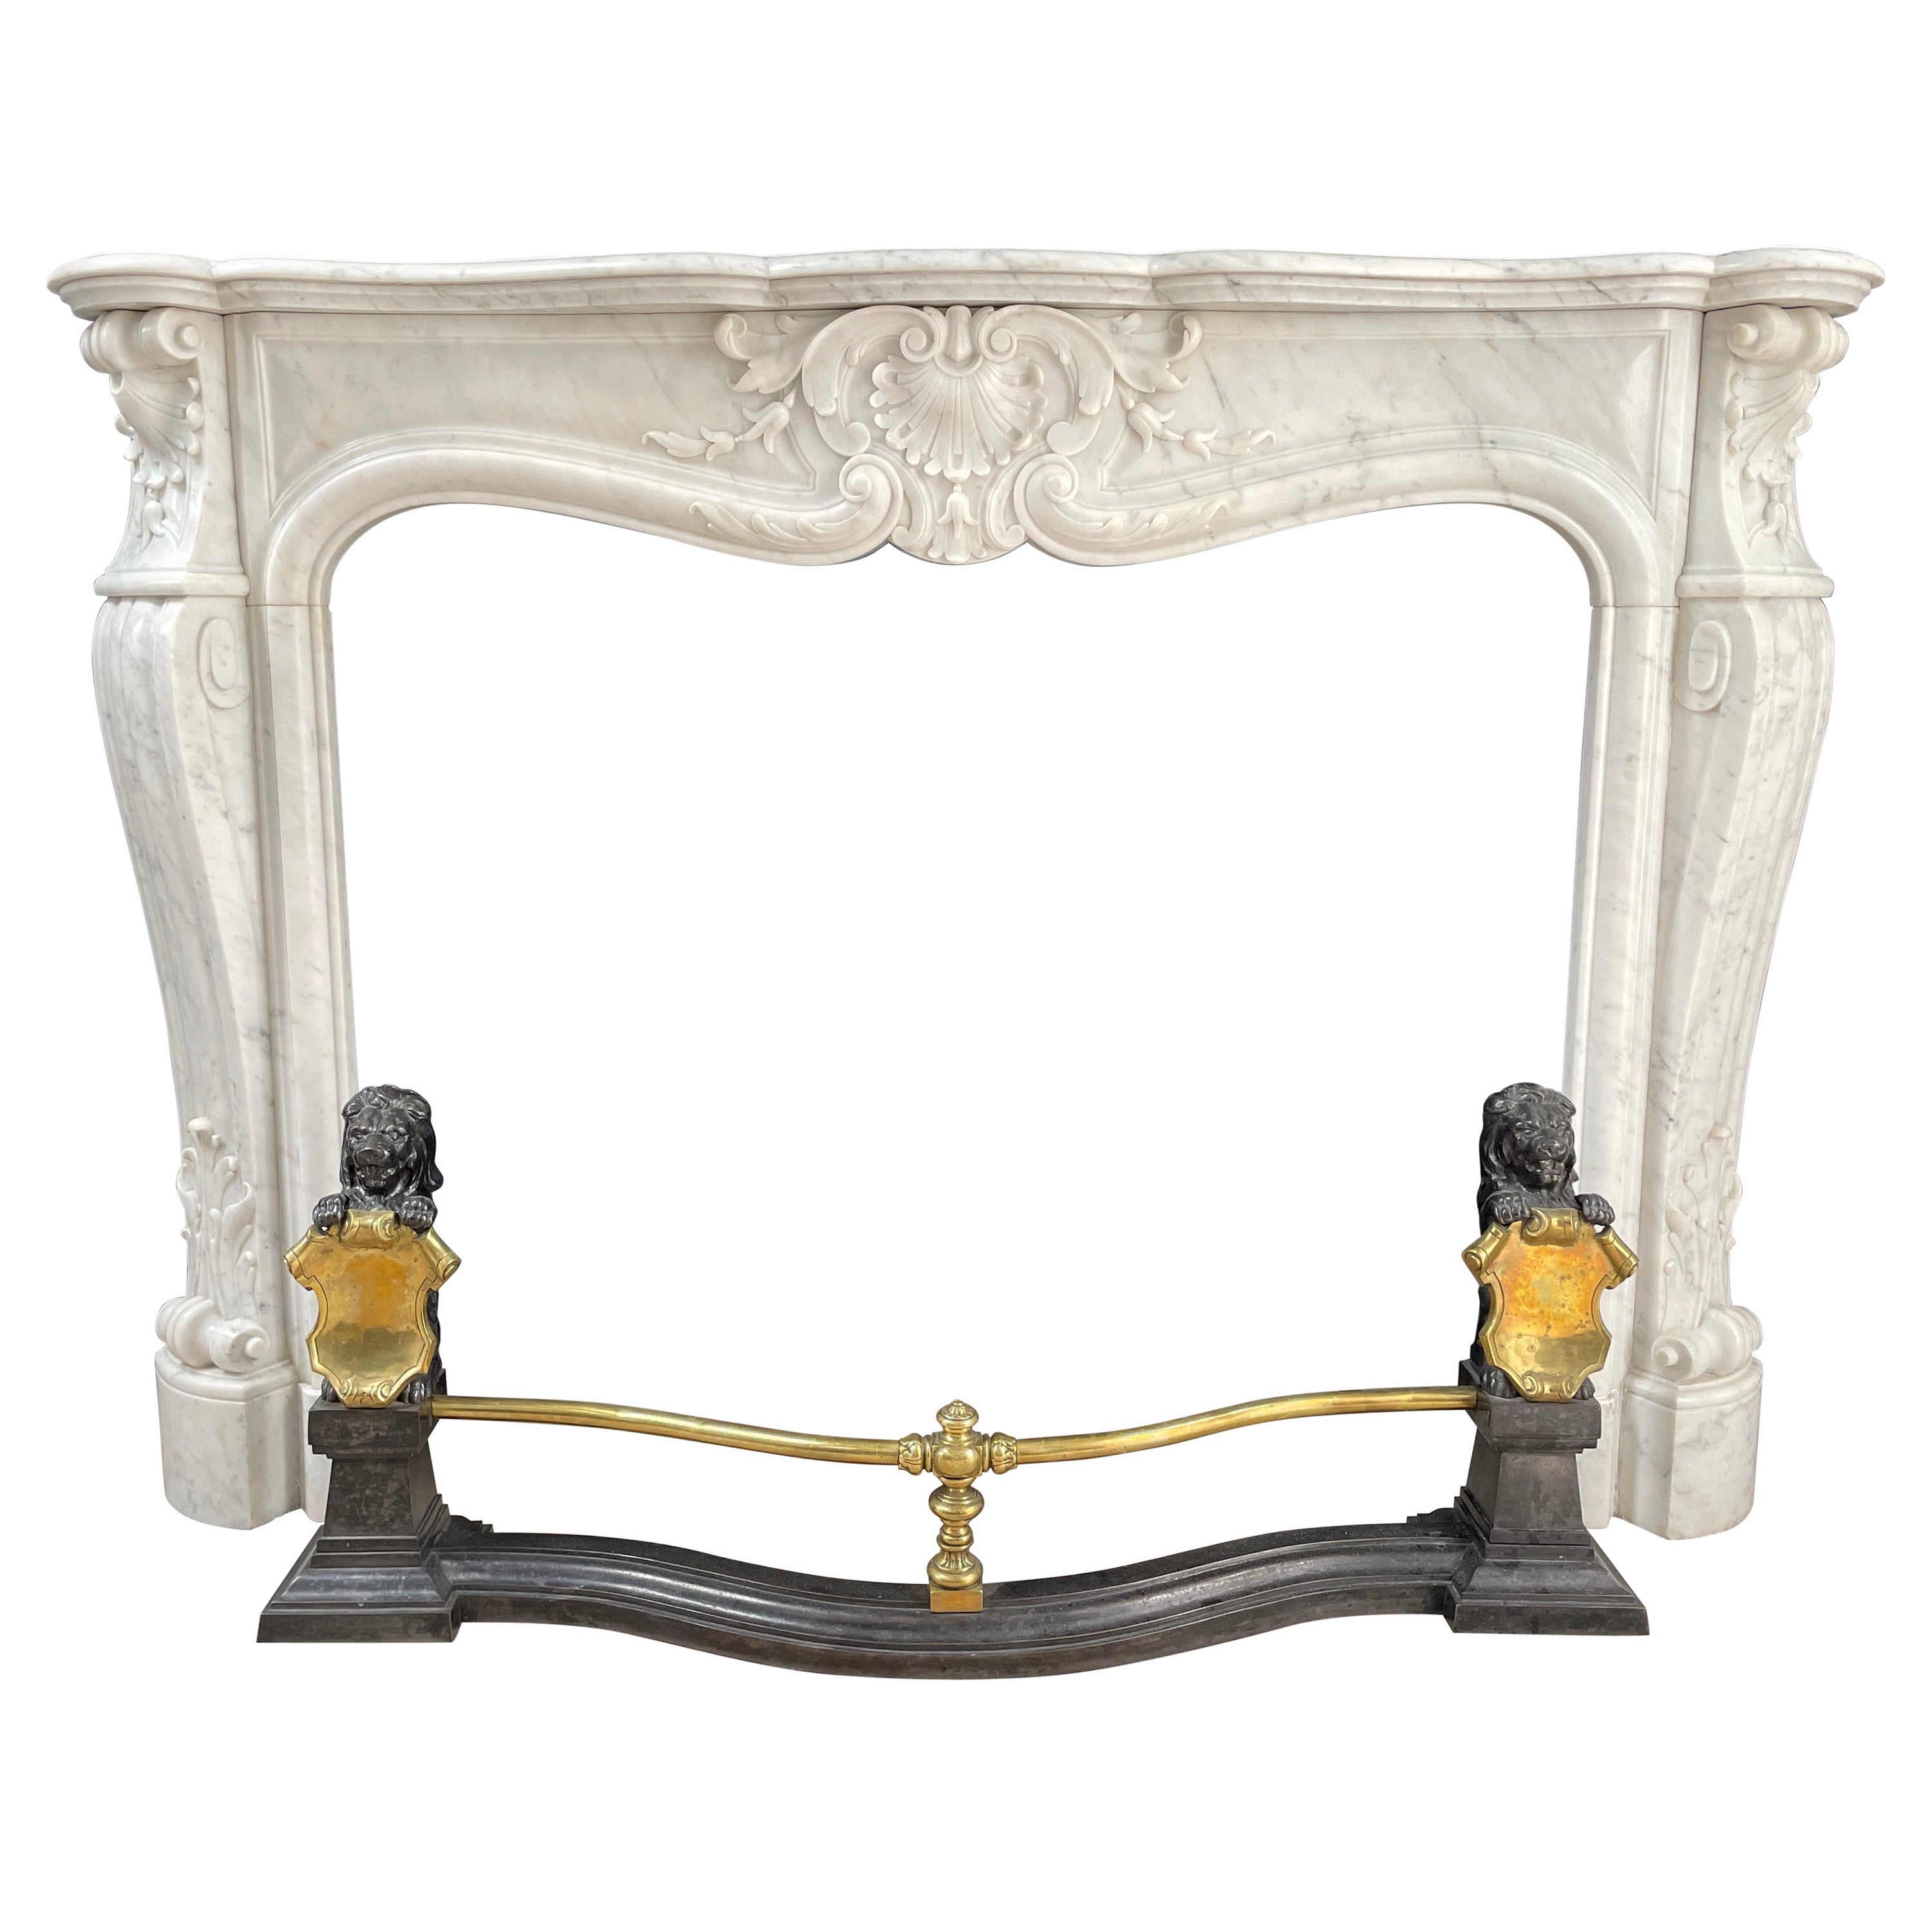 French Luxury Antique Carrara Marble Half Circulation Fireplace For Sale